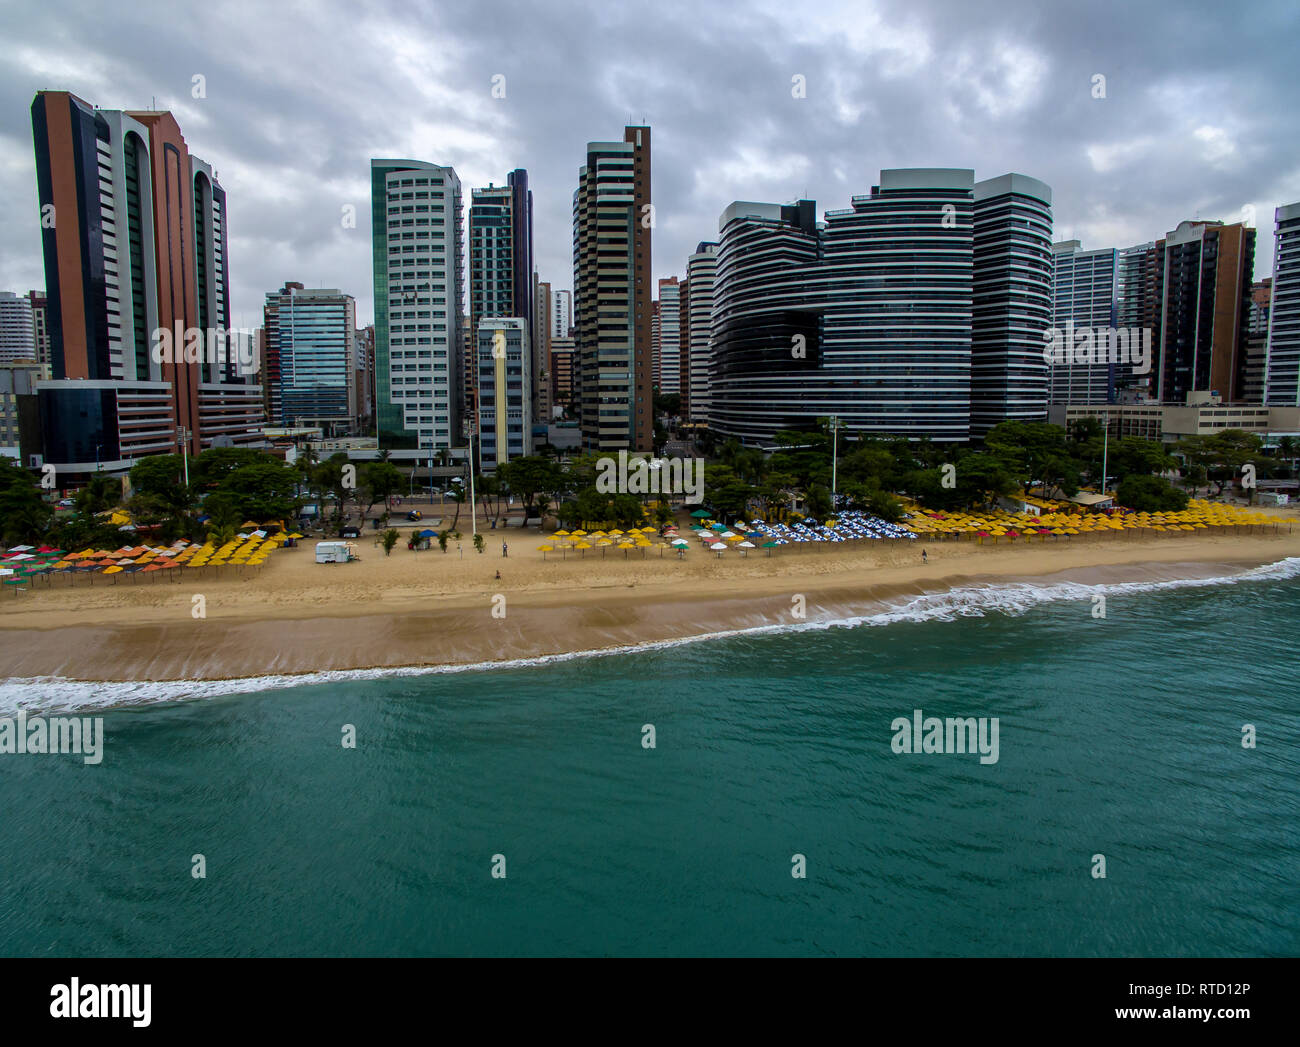 Travel memories of the city of Fortaleza, state of Ceara Brazil South America. Stock Photo